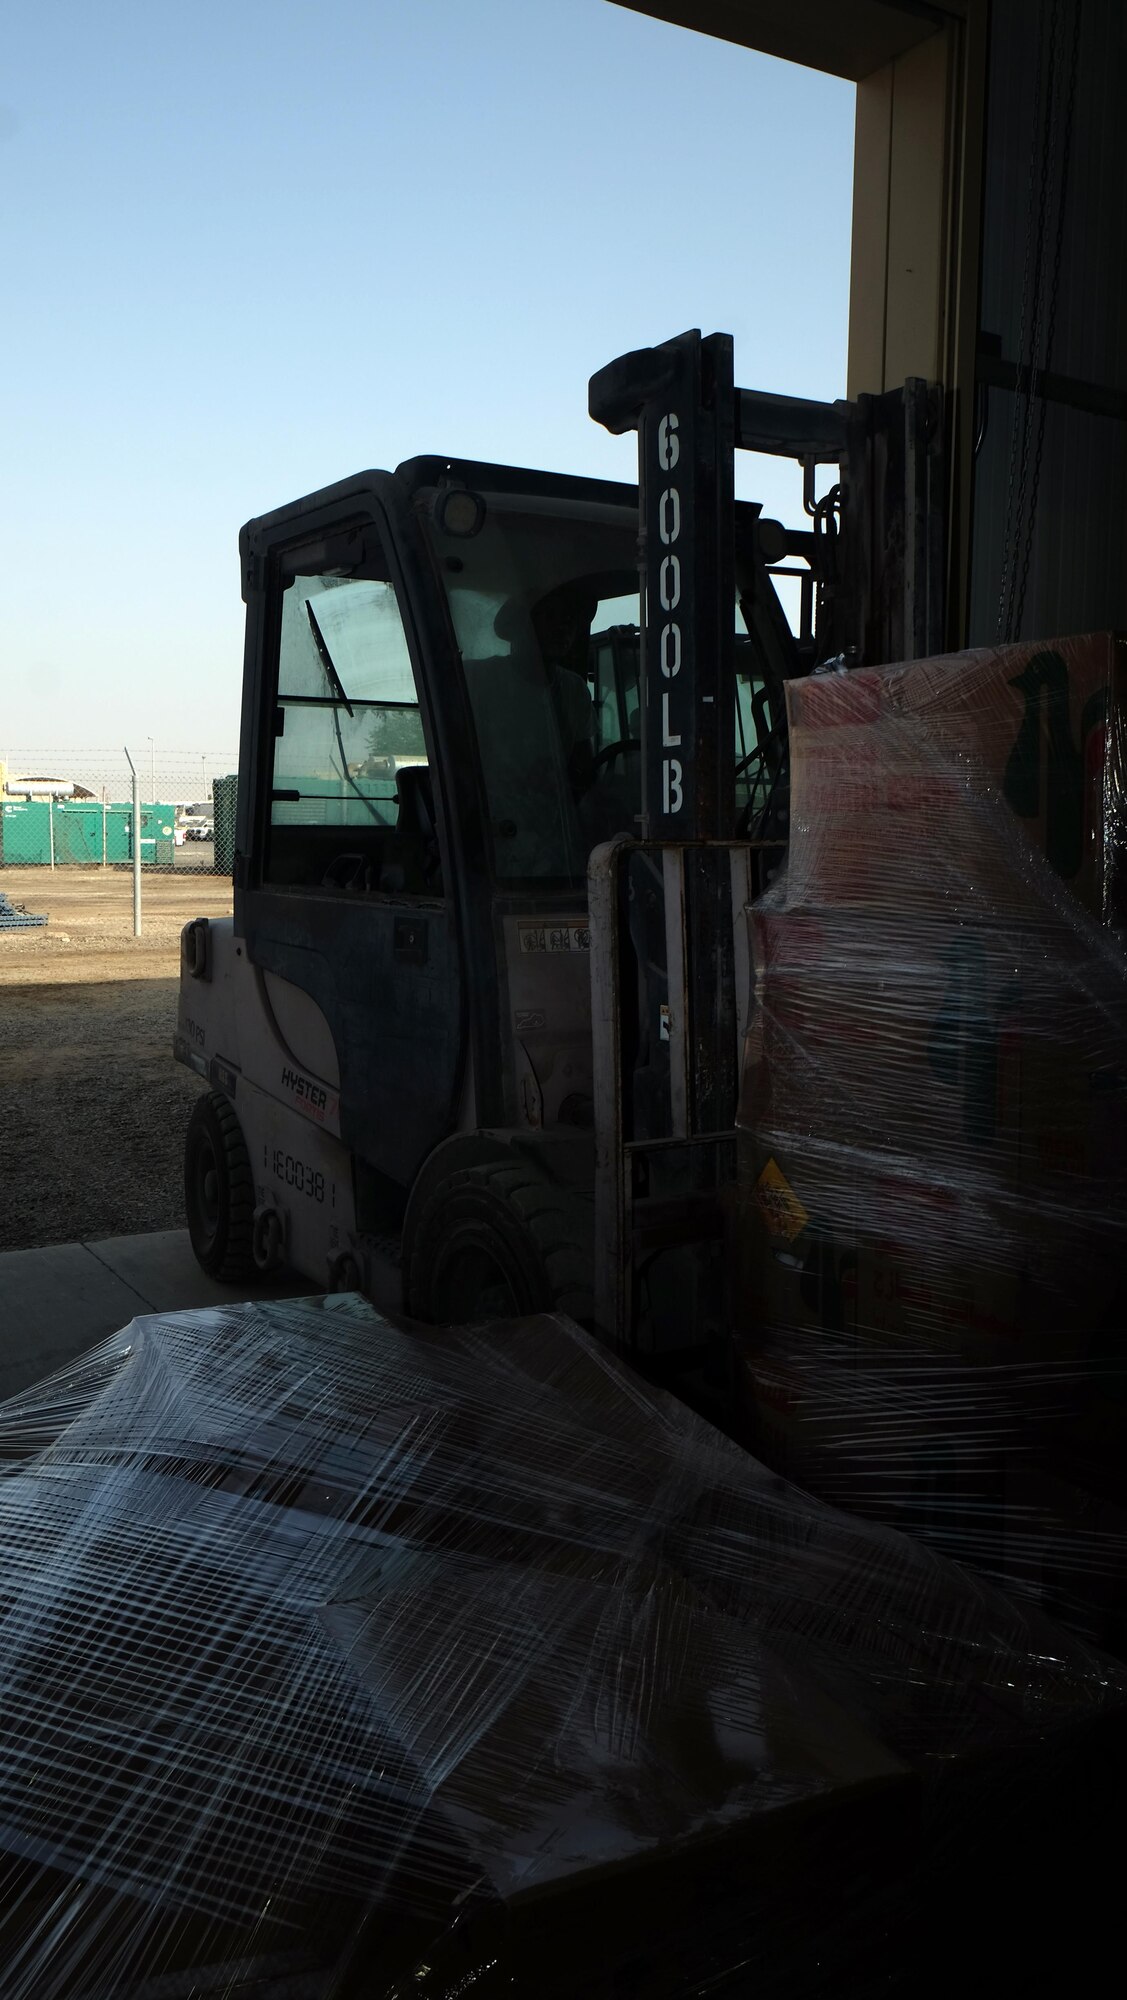 Senior Airman Jaylin, 380th Force Support Squadron storeroom assistant, unloads pallets of food July 6, 2017, at an undisclosed location in southwest Asia. To supply 380 AEW Airmen and Coalition partners, and therefore the mission, 380 EFSS orders approximately $200,000 in food each week. They also deliver pallets of water to up to 80 locations around the compound to keep Airmen hydrated. (U.S. Air Force photo by Senior Airman Preston Webb)